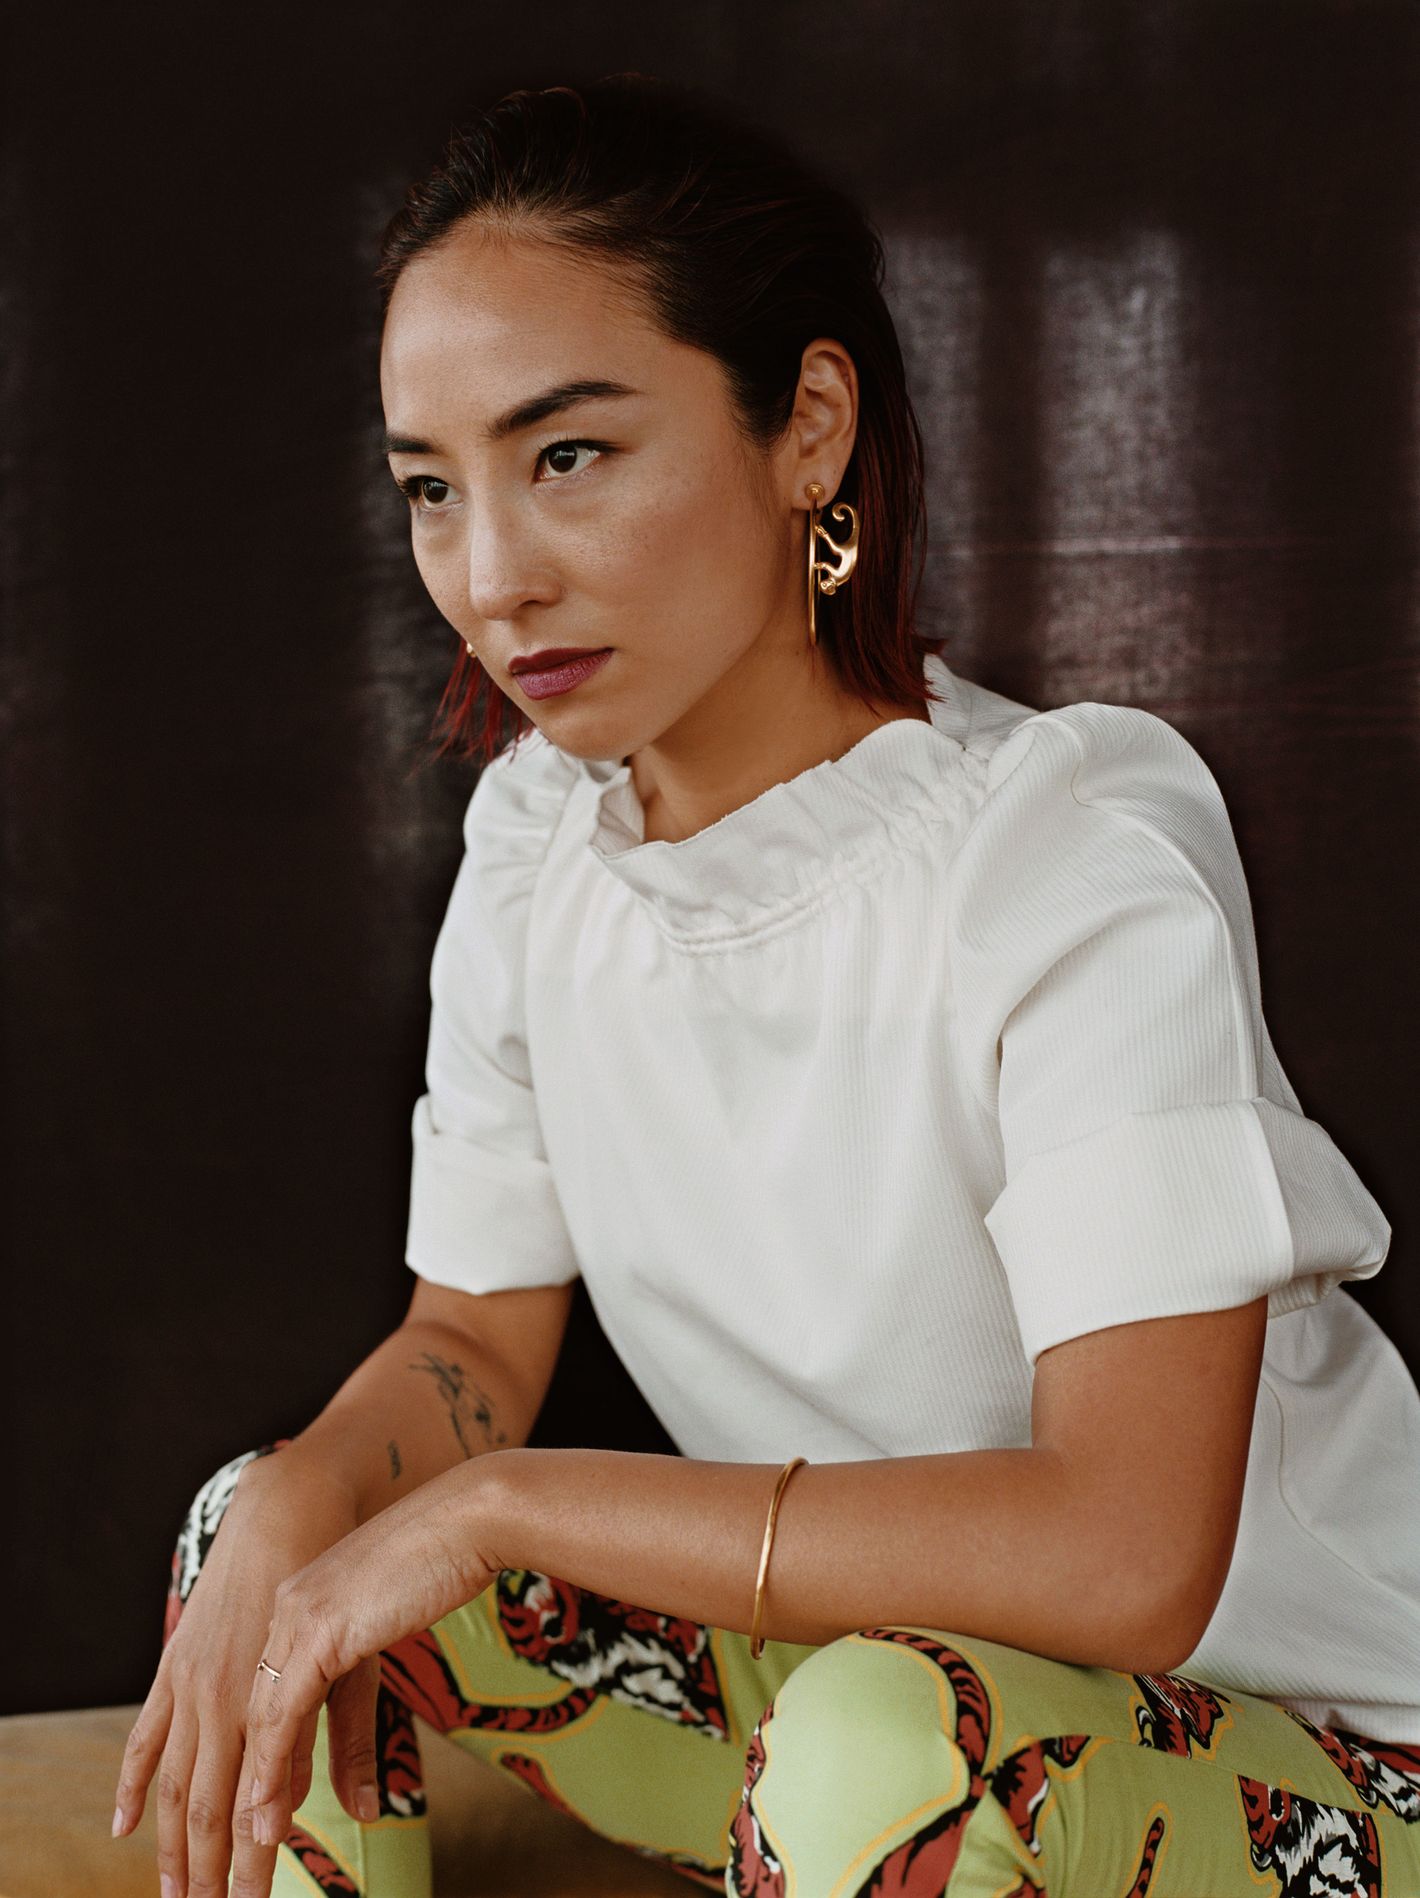 Profile: Greta Lee from 'High Maintenance' and 'Girls'